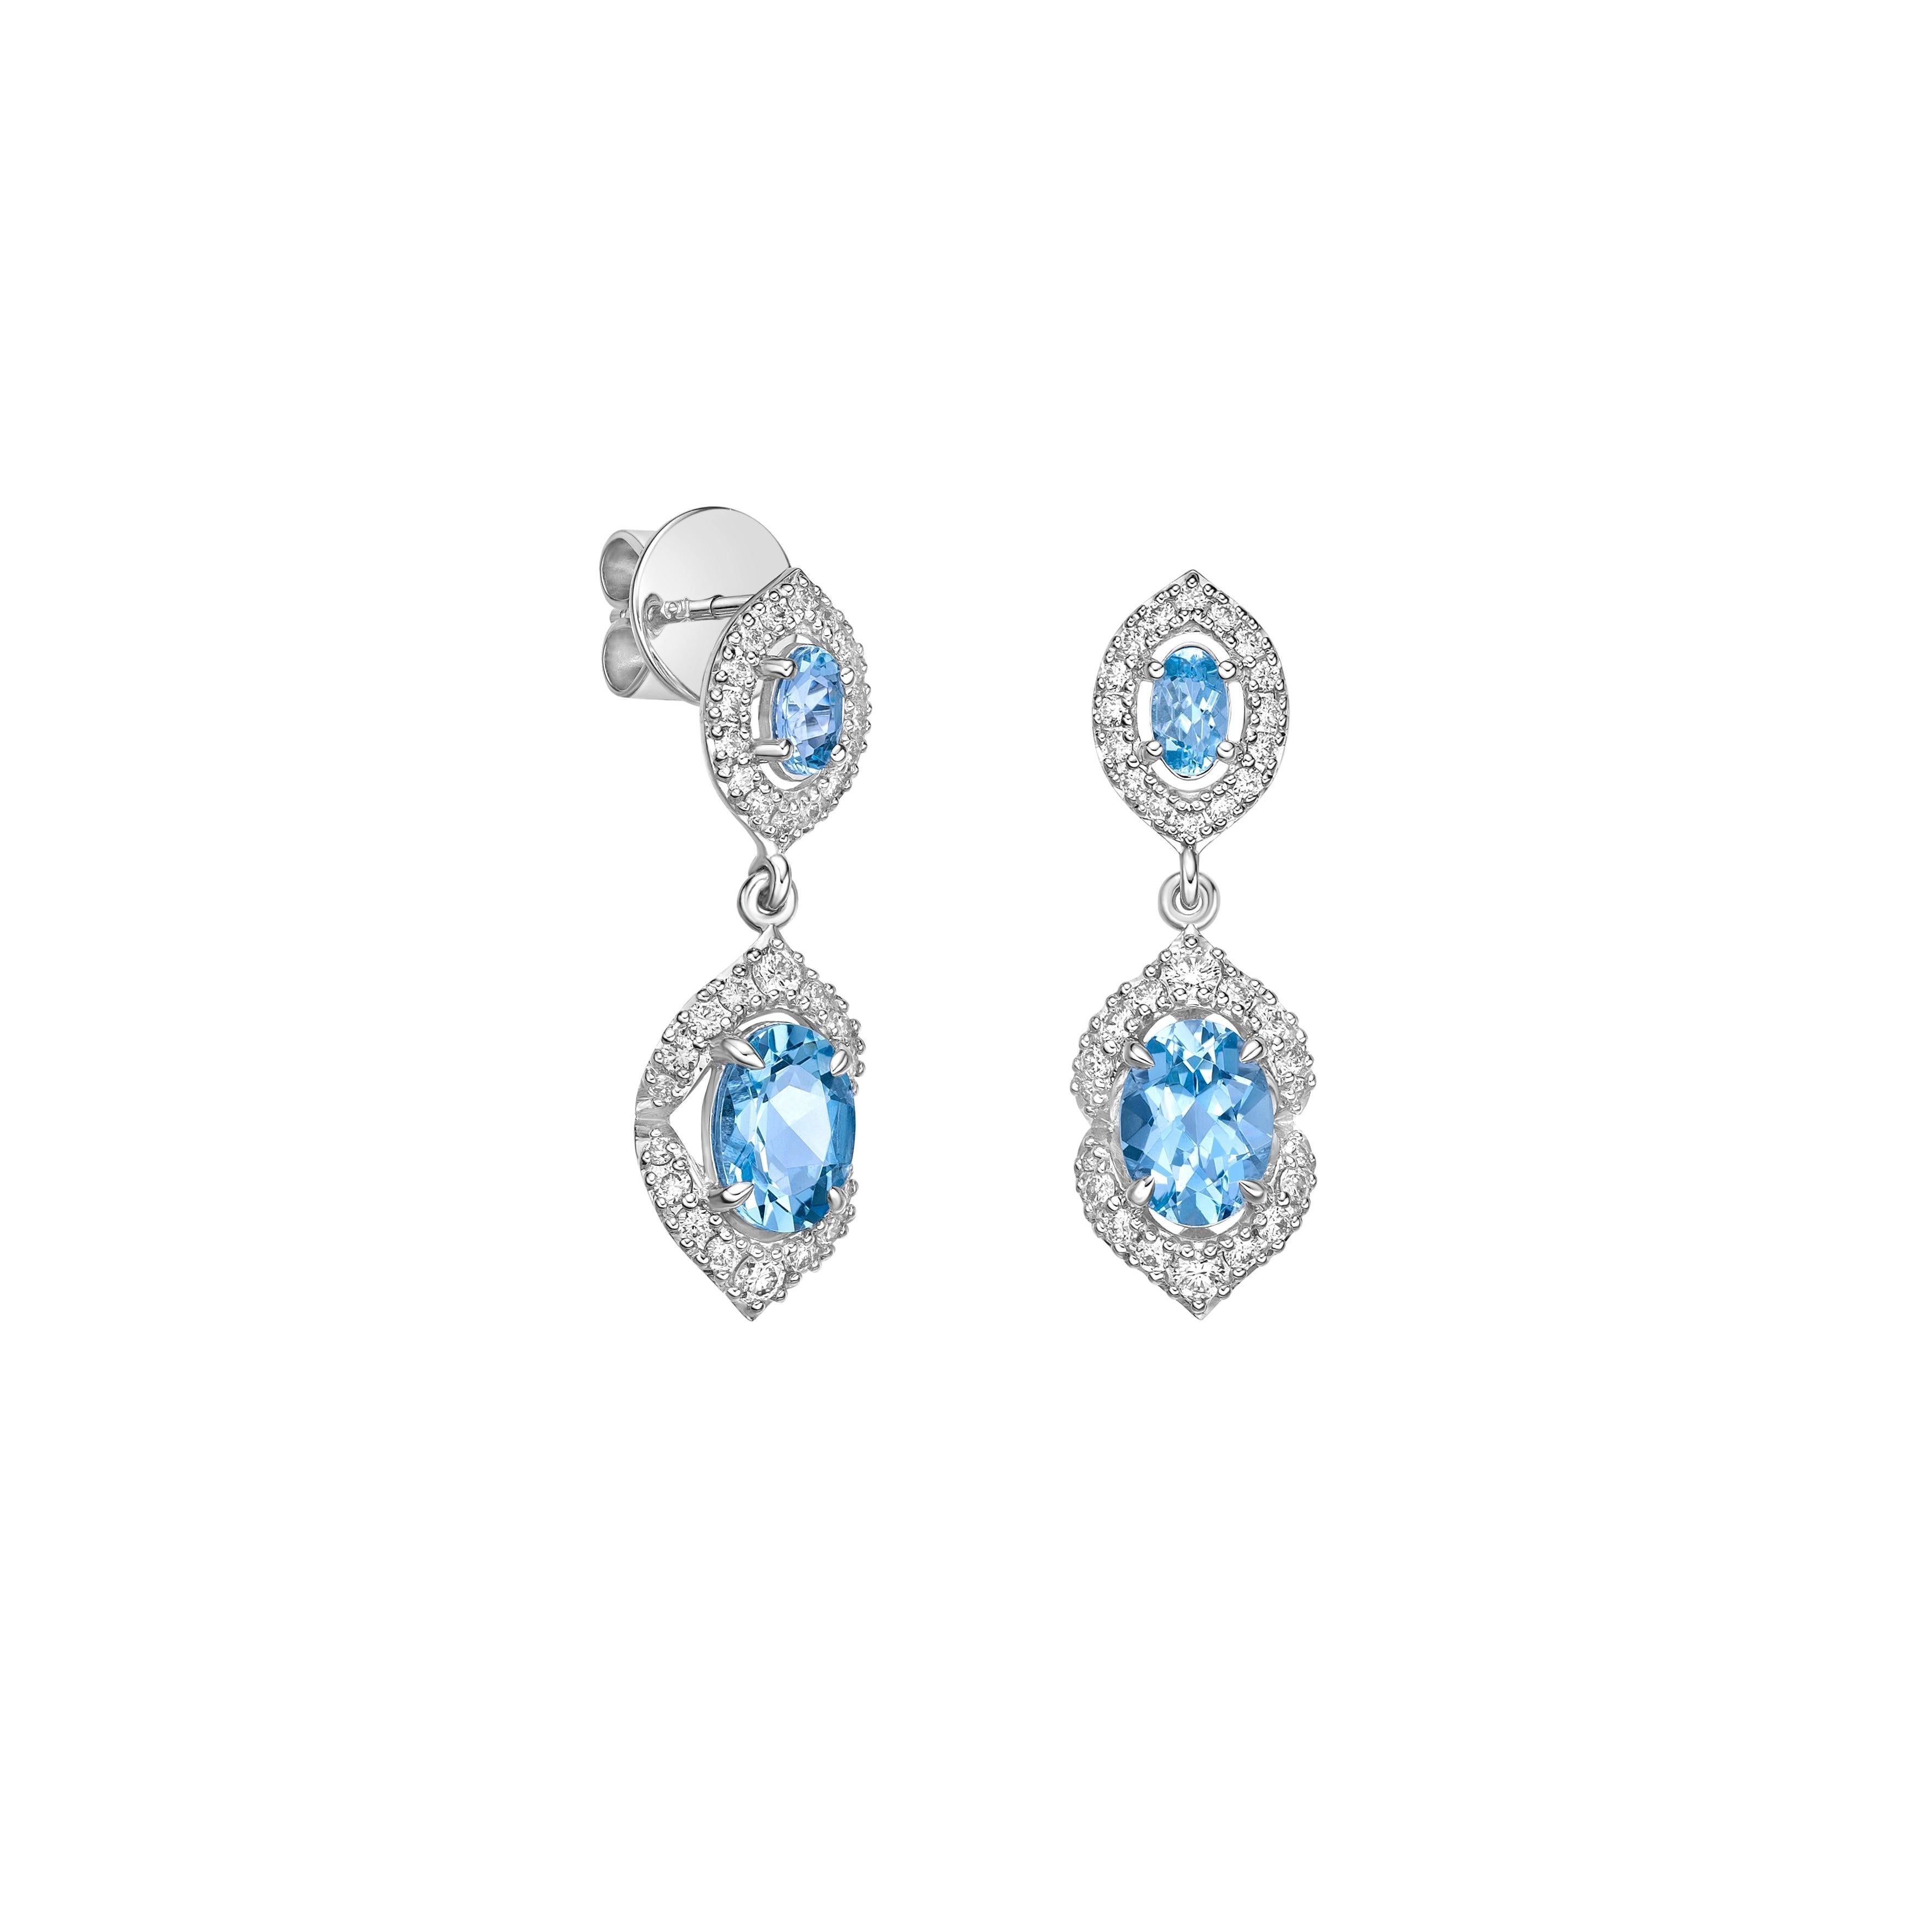 Elevate your look with our stunning aquamarine drop earrings, featuring a mesmerizing ice blue hue that radiates elegance. Enhanced with diamonds and crafted in white gold, these earrings offer a timeless allure with a touch of modern